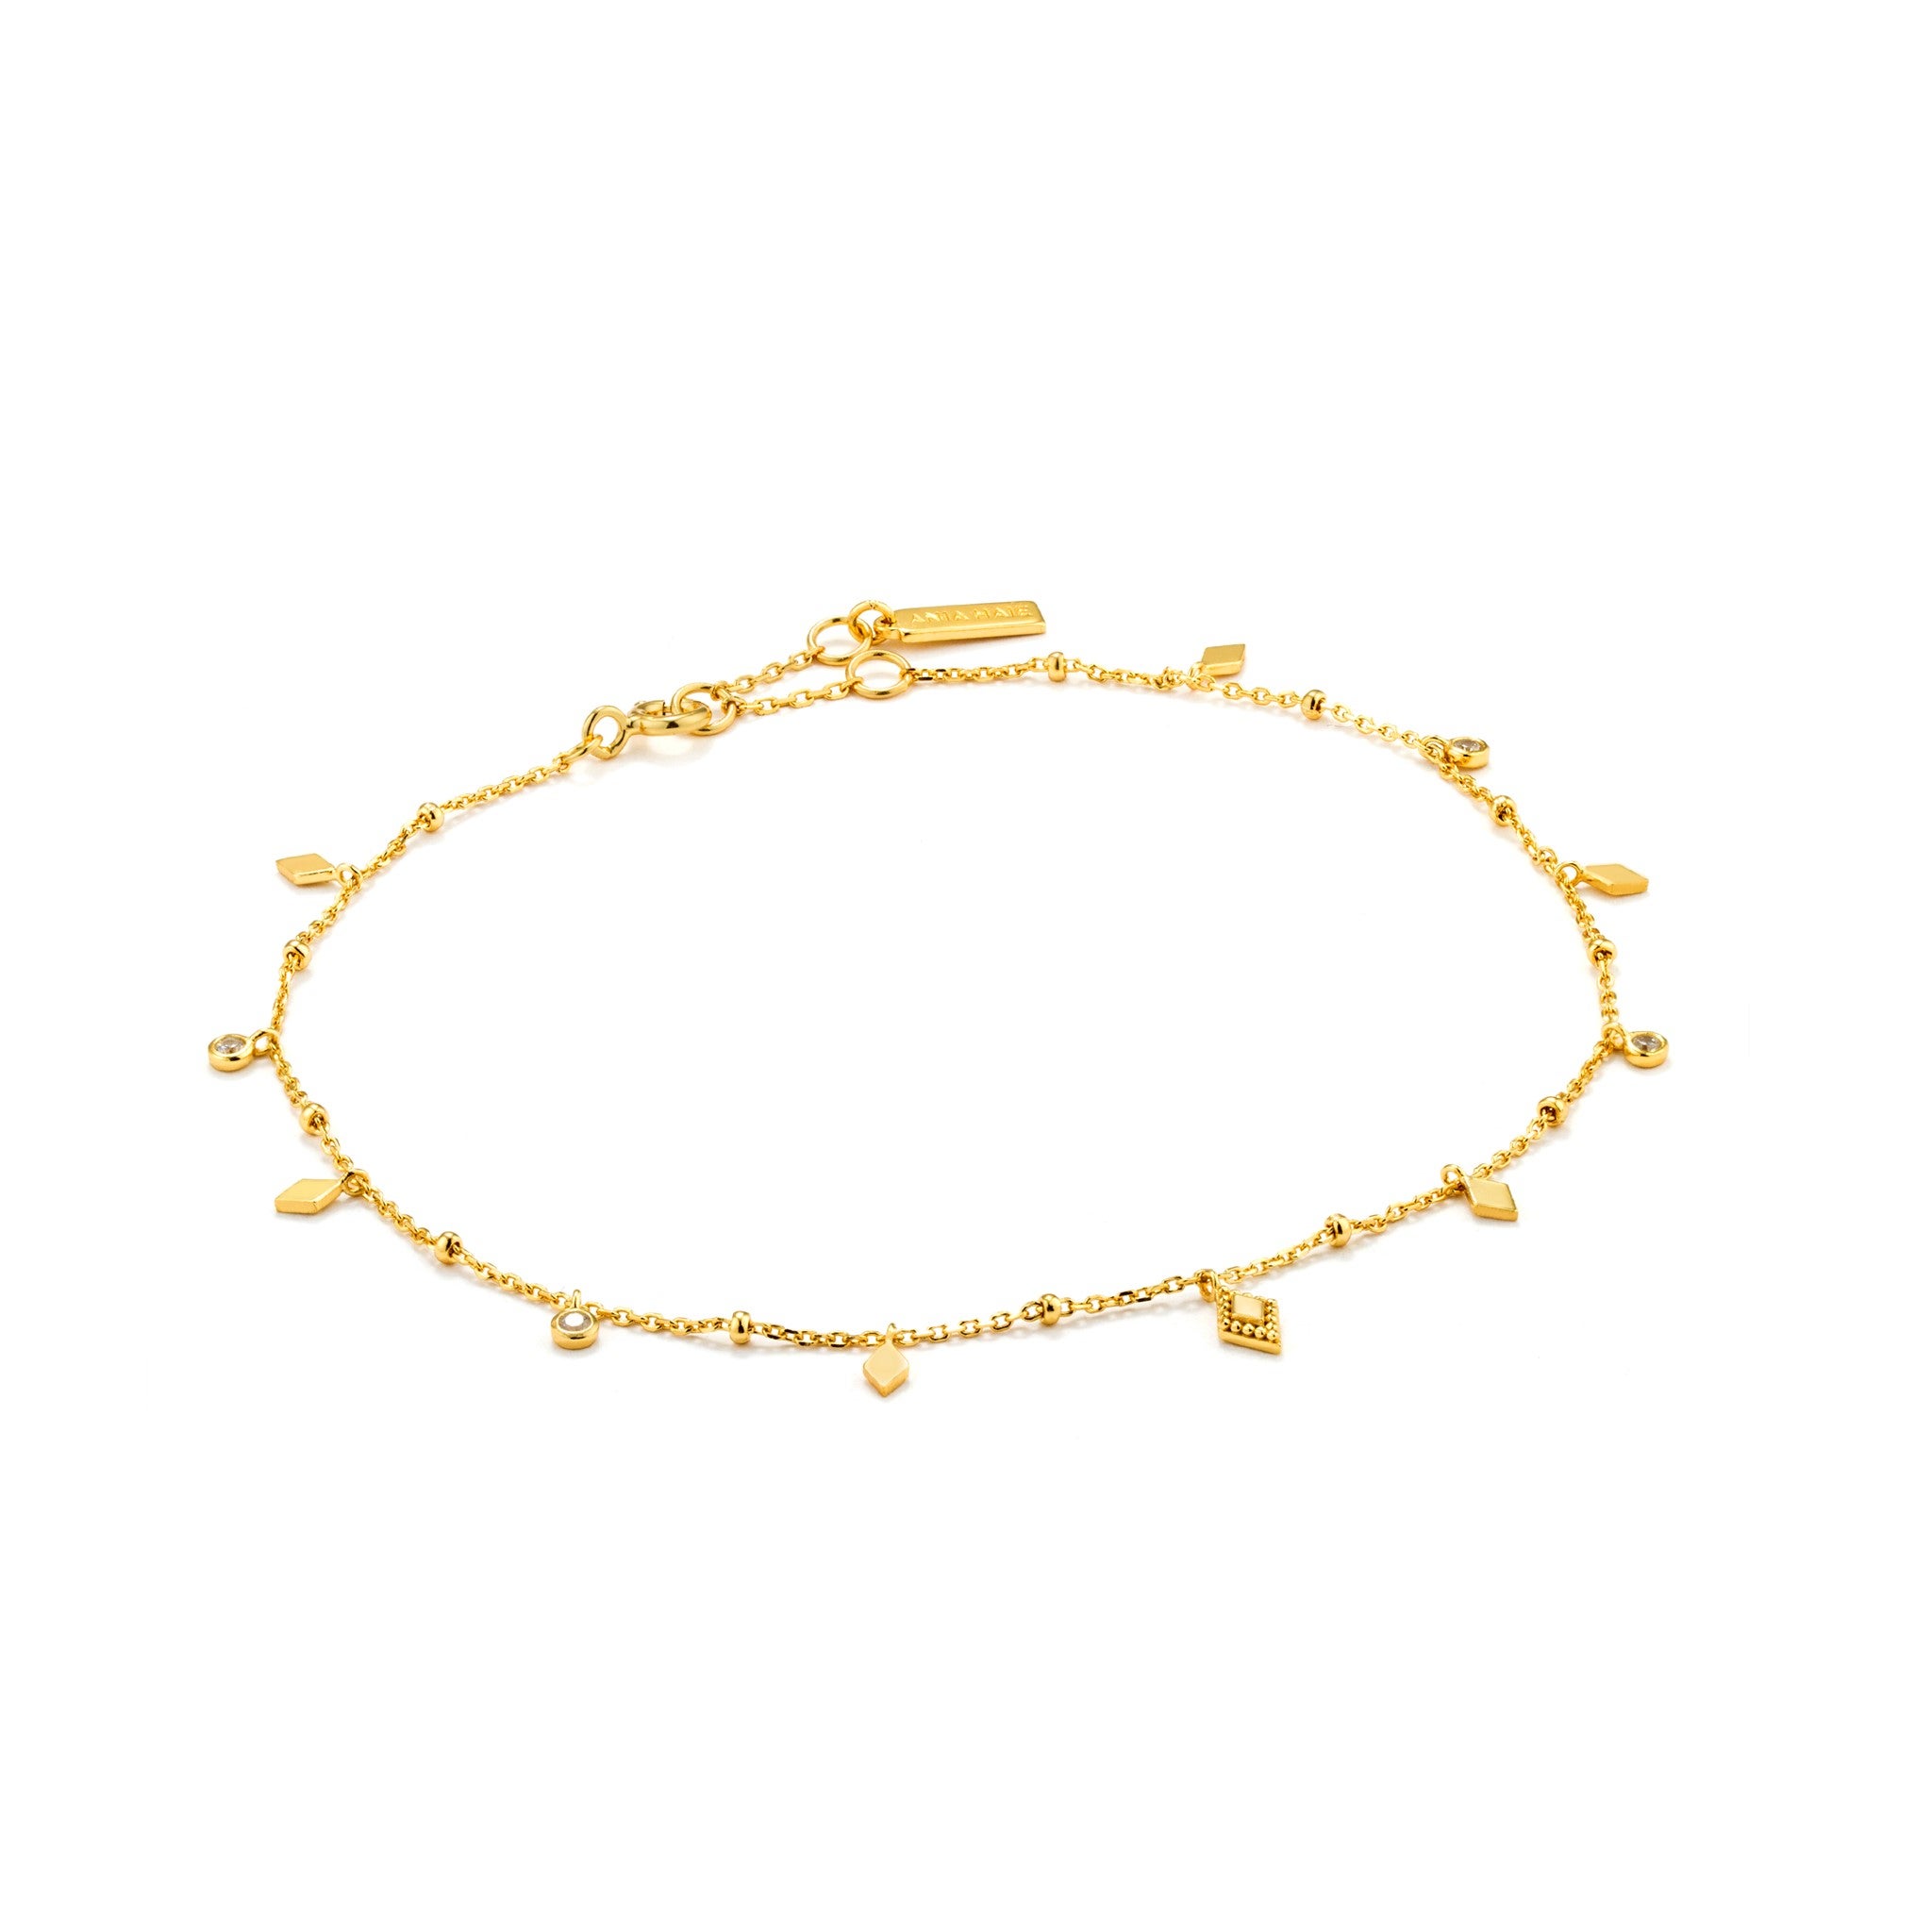 ANIA HAIE BOHEMIA ANKLET F016-01G - Rauchs Jewelry & Gifts